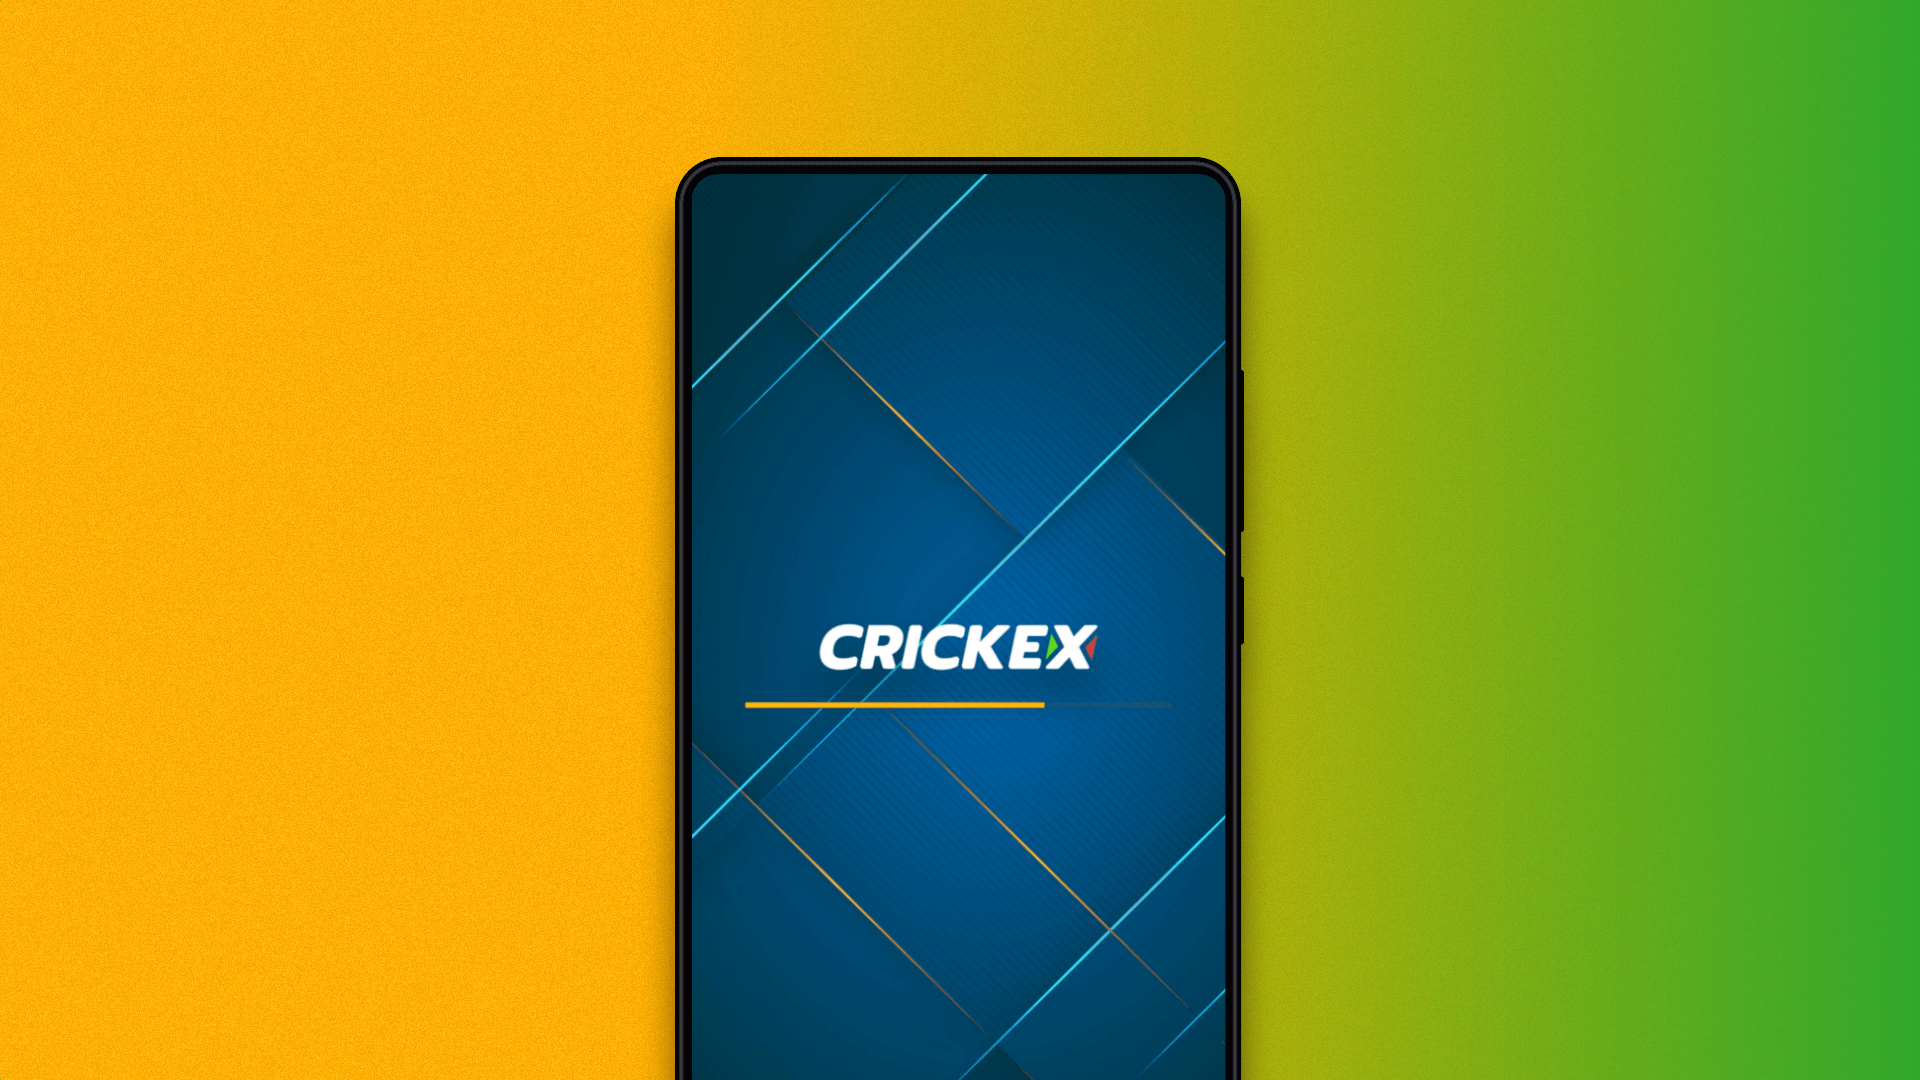 the first launch of the crickex app on an android smartphone